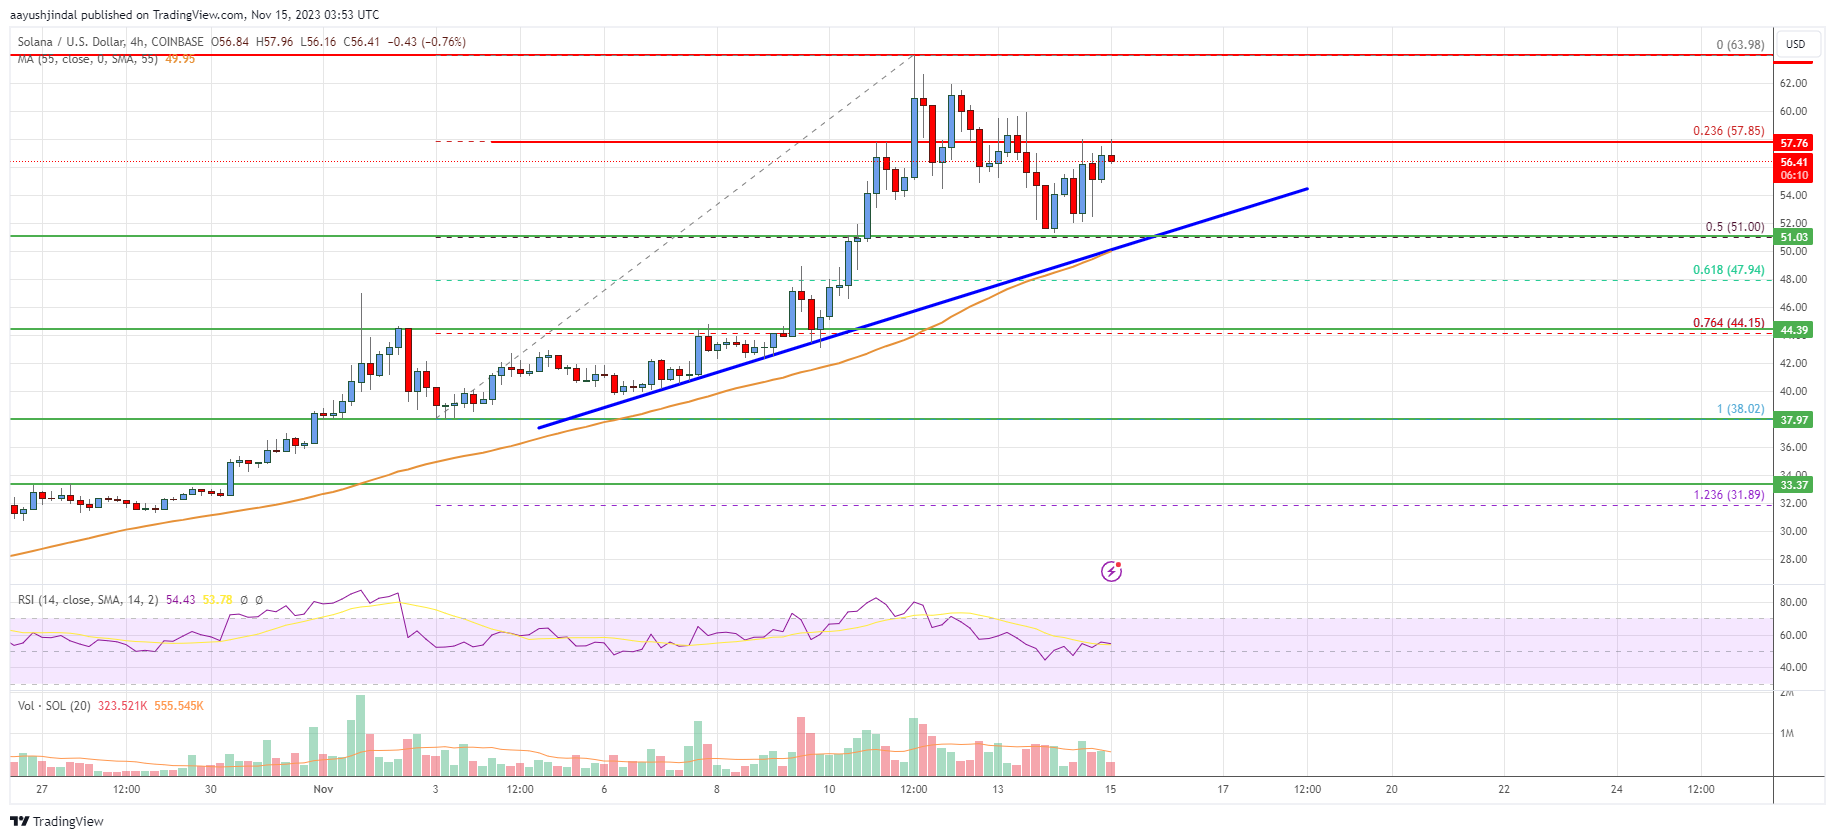 Solana (SOL) Price Analysis: Rally Could Resume From $50